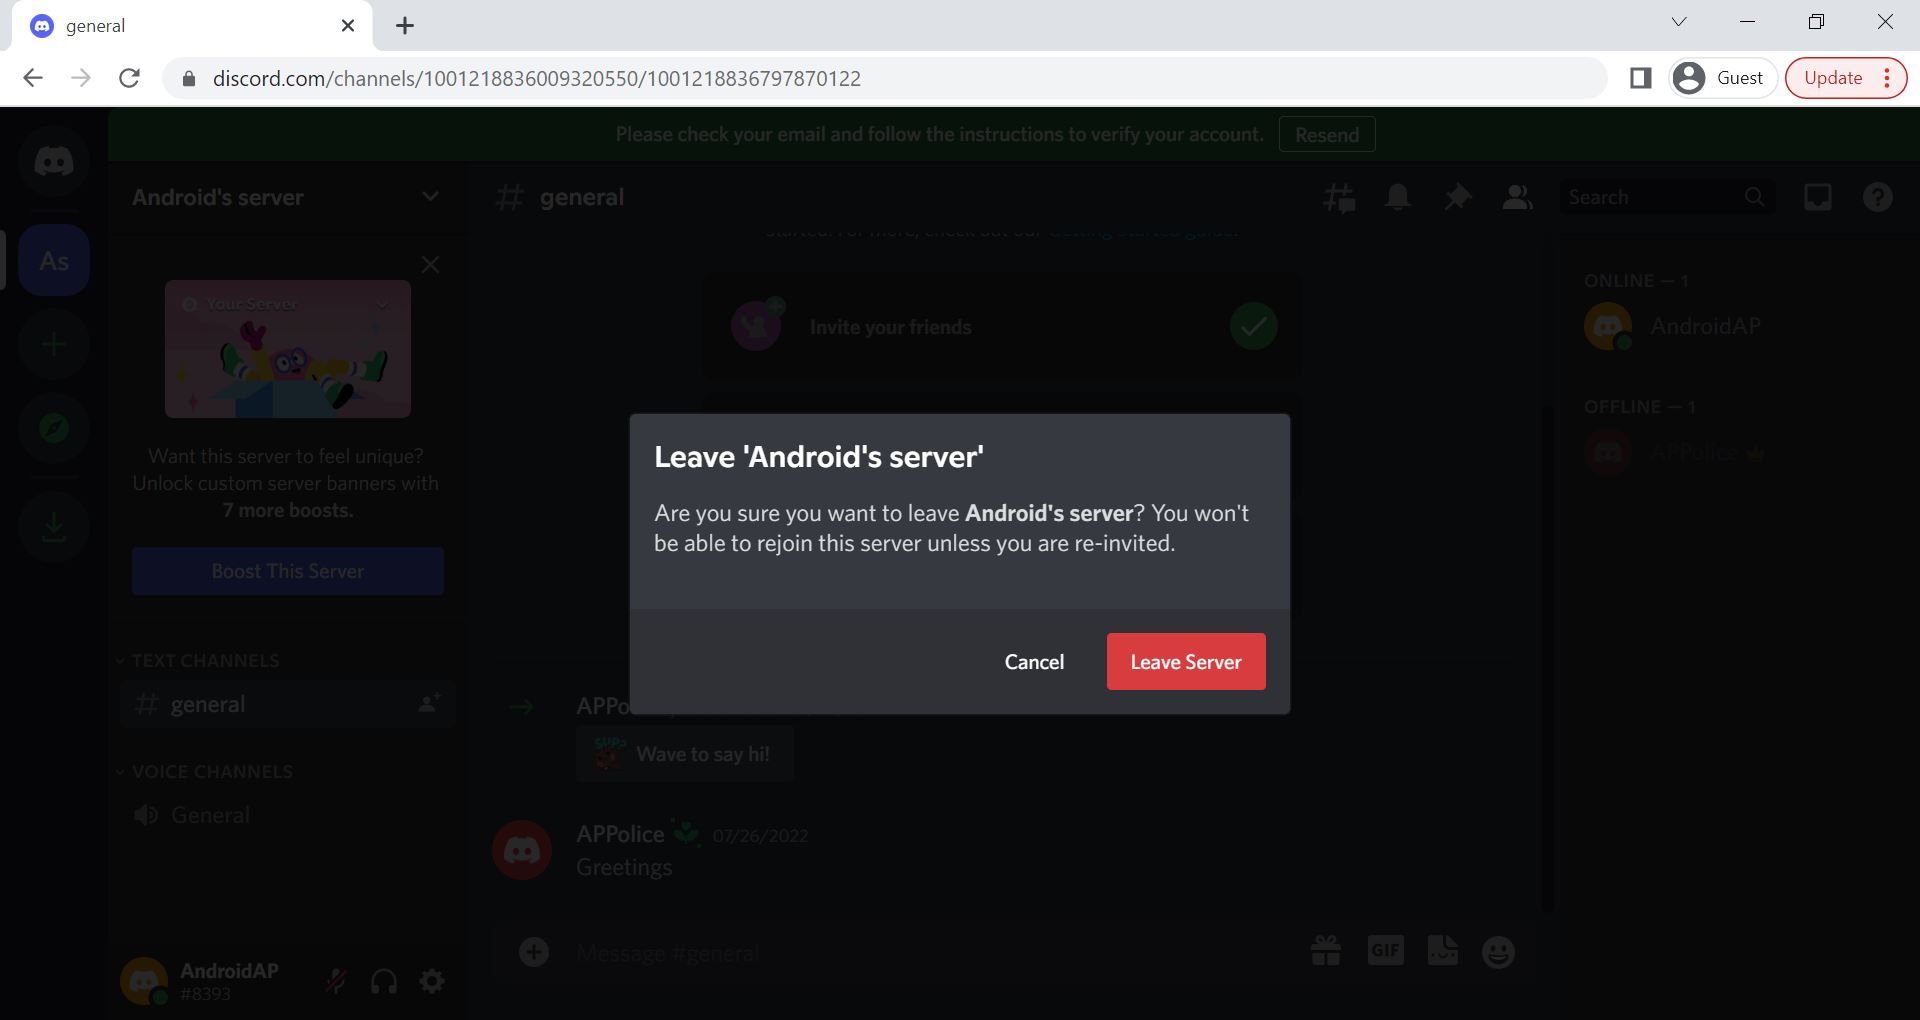 Screenshot of confirming to leave a Discord server through the Discord web page